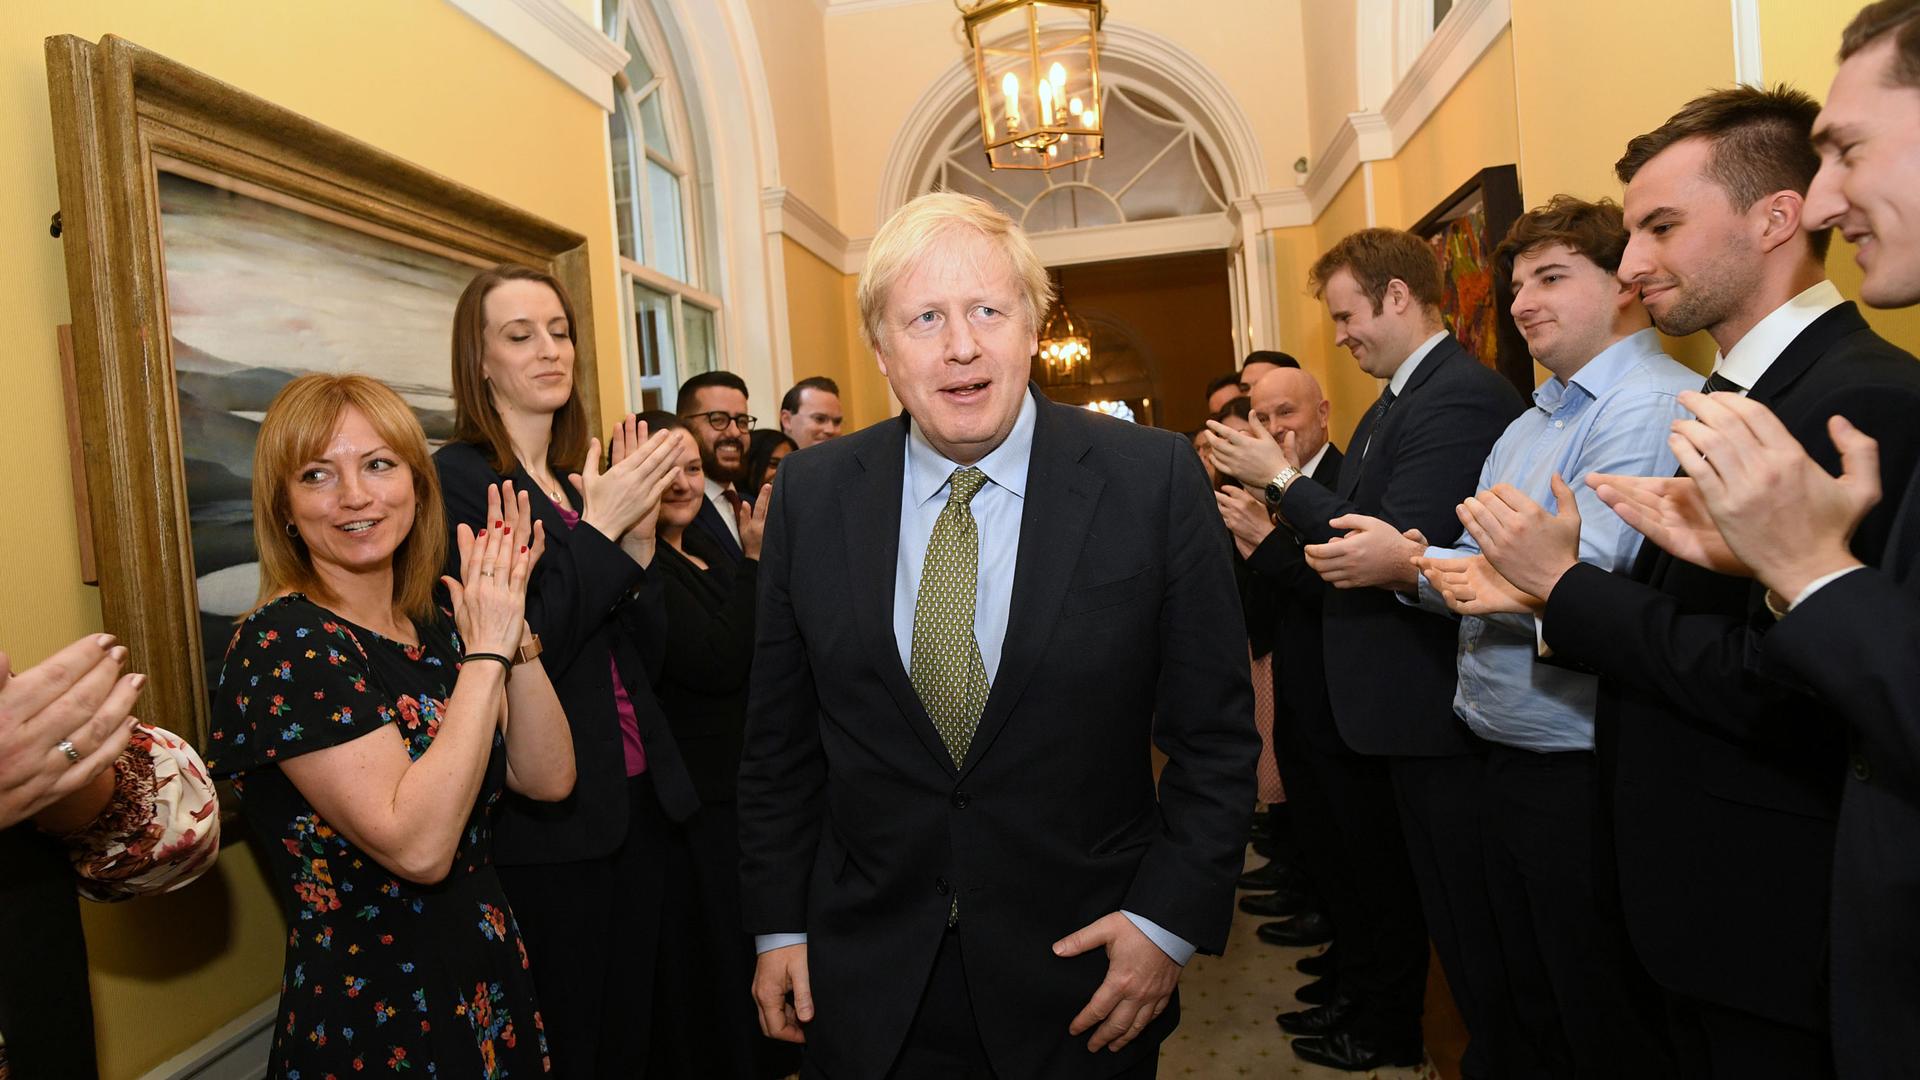 Britain's Prime Minister Boris Johnson is shown walking down a hallway with staff applauding on either side.